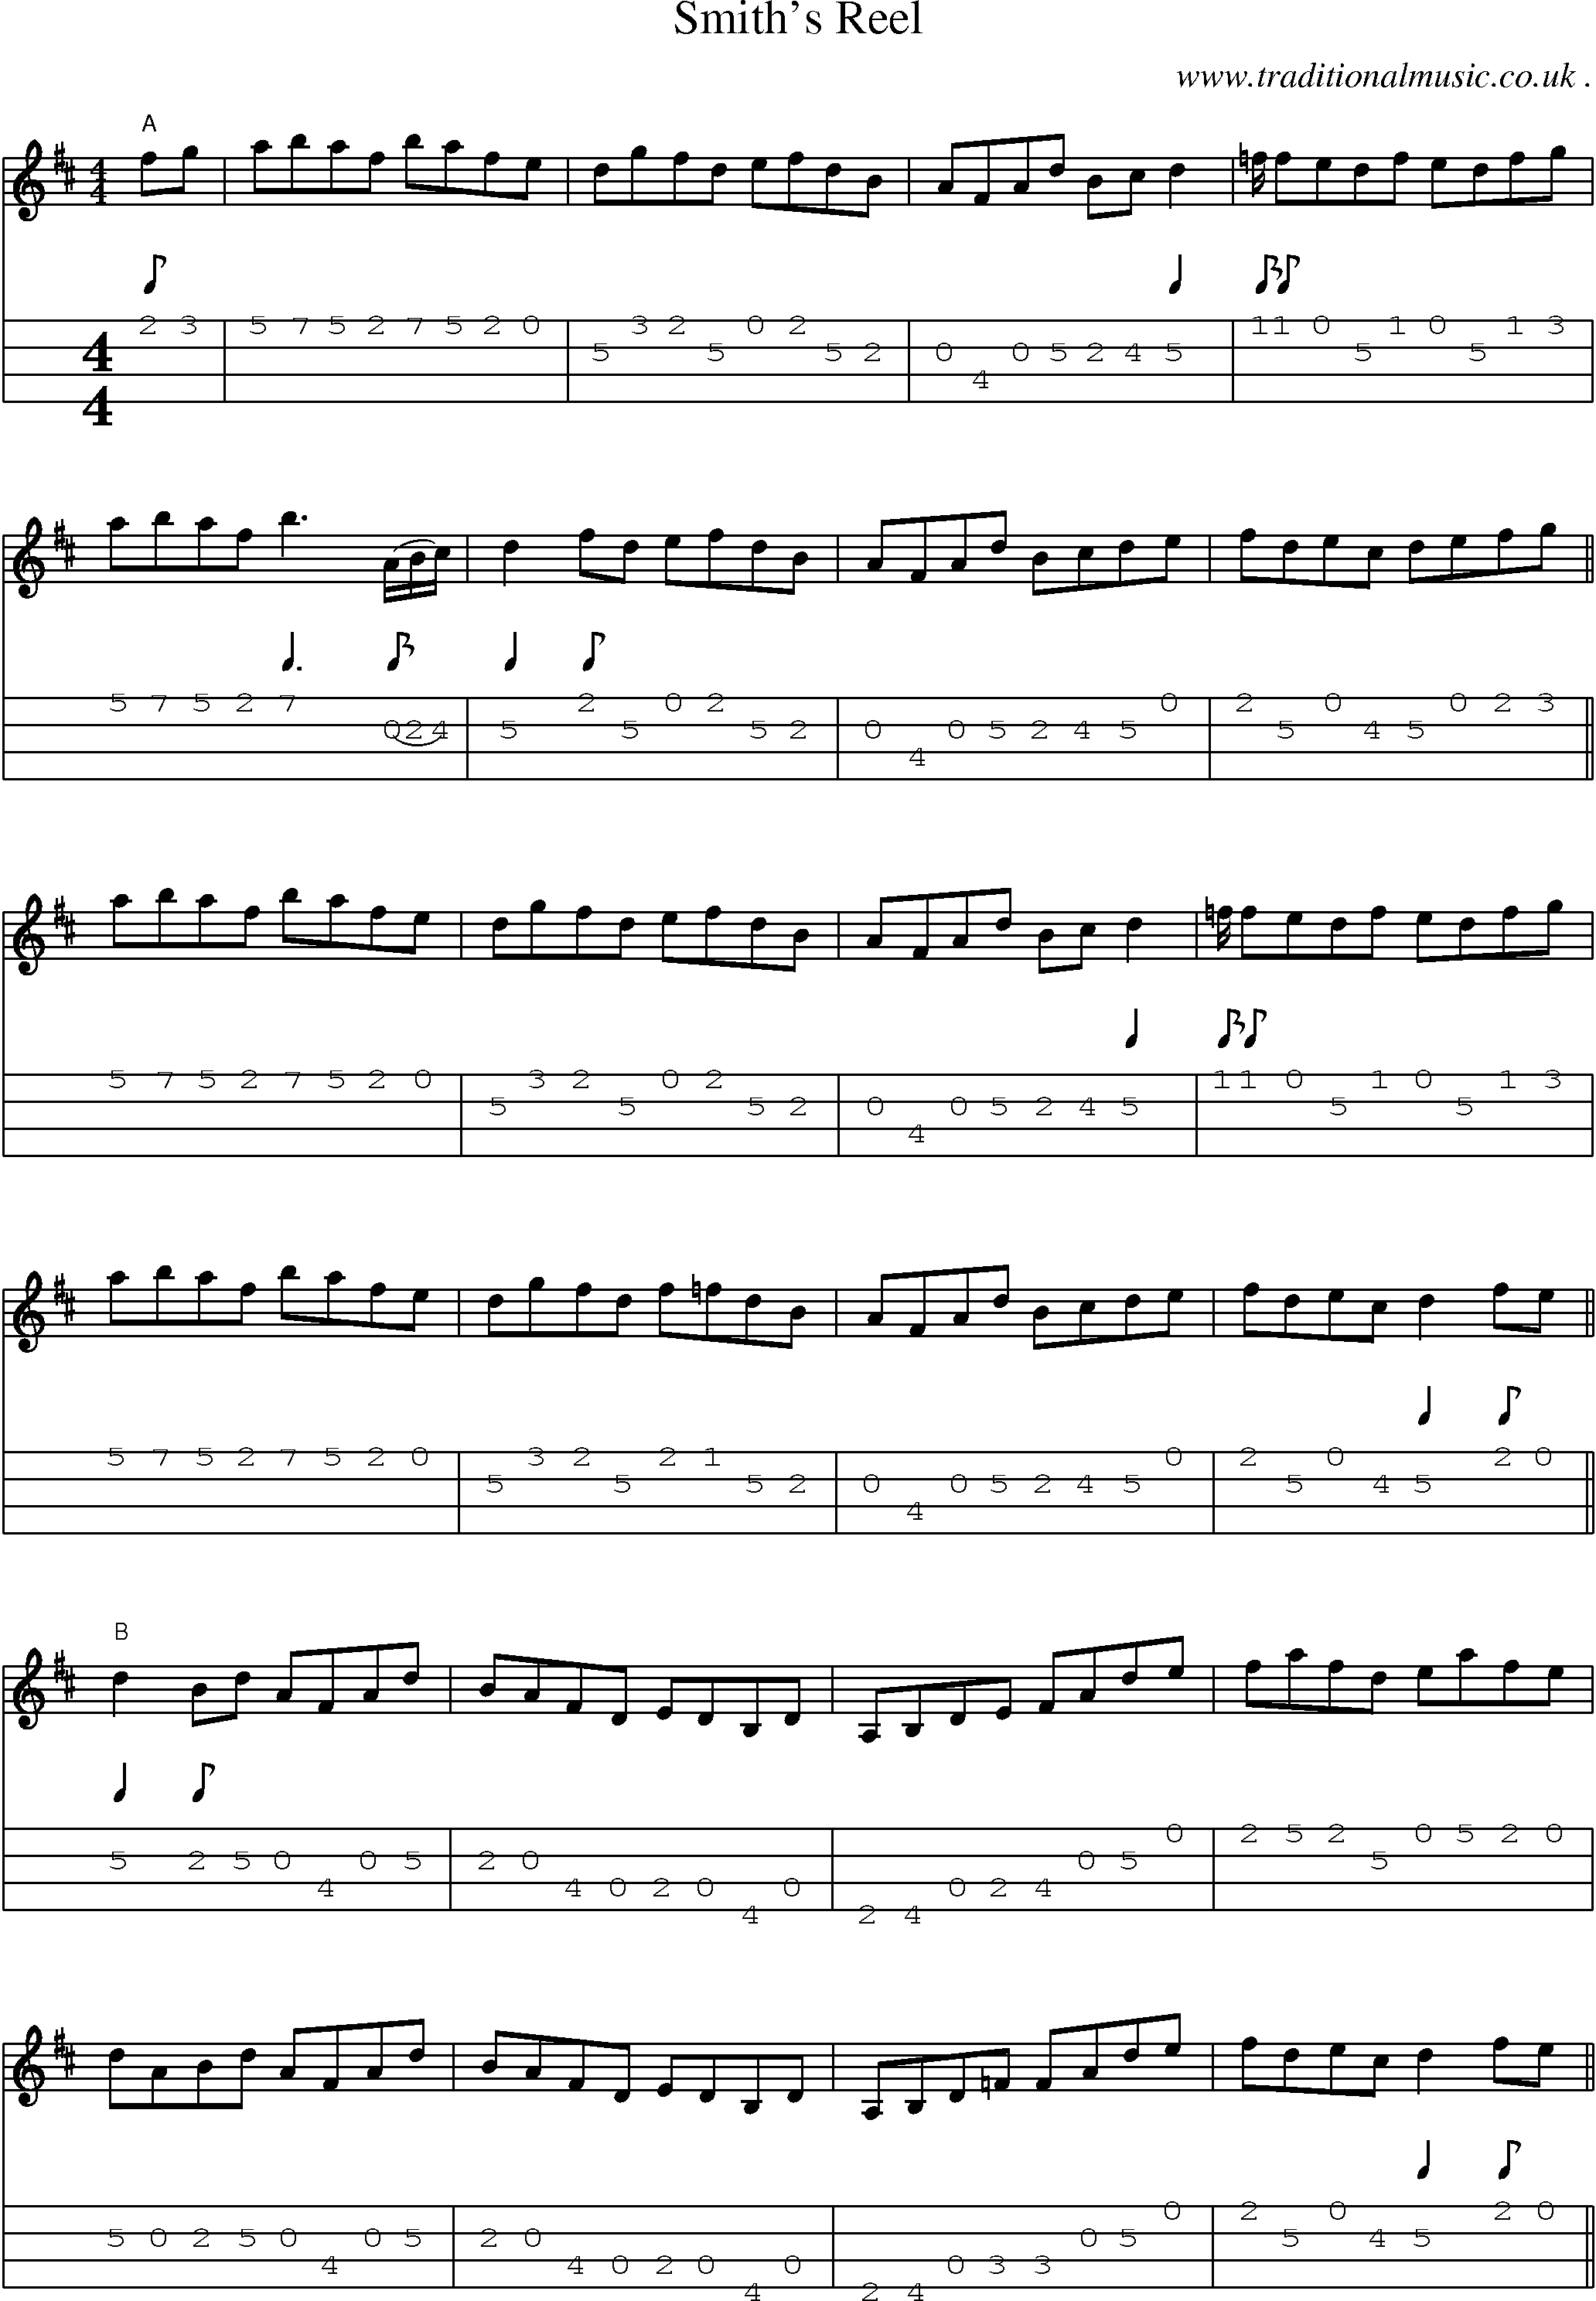 Music Score and Mandolin Tabs for Smiths Reel